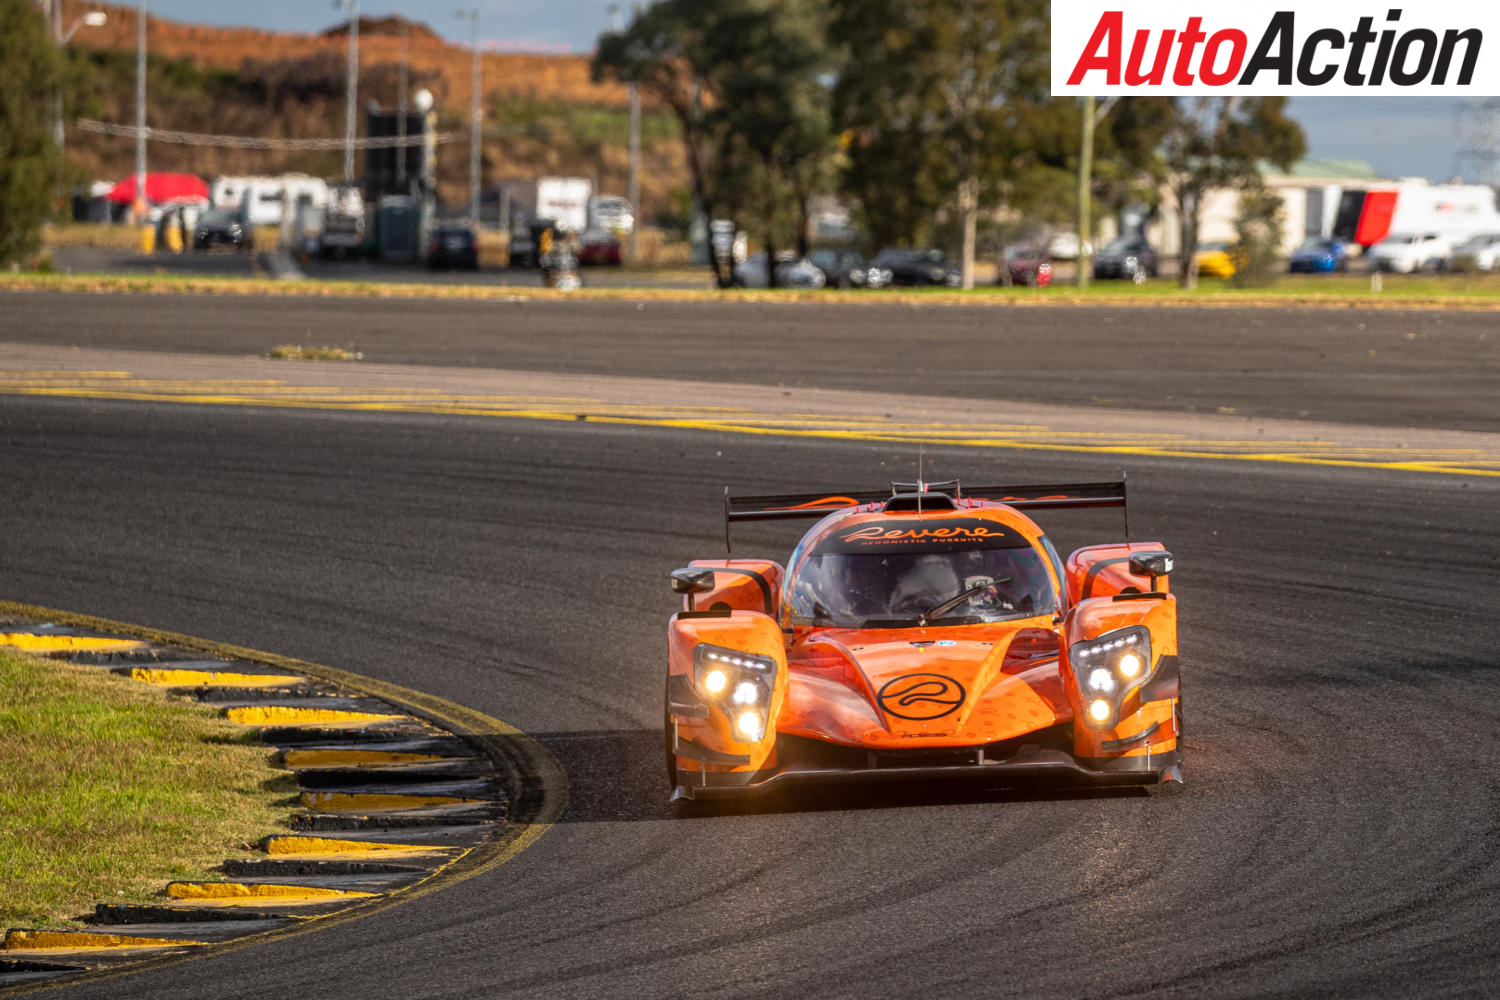 All-Aussie squad relishing Le Mans chance - Image: InSyde Media